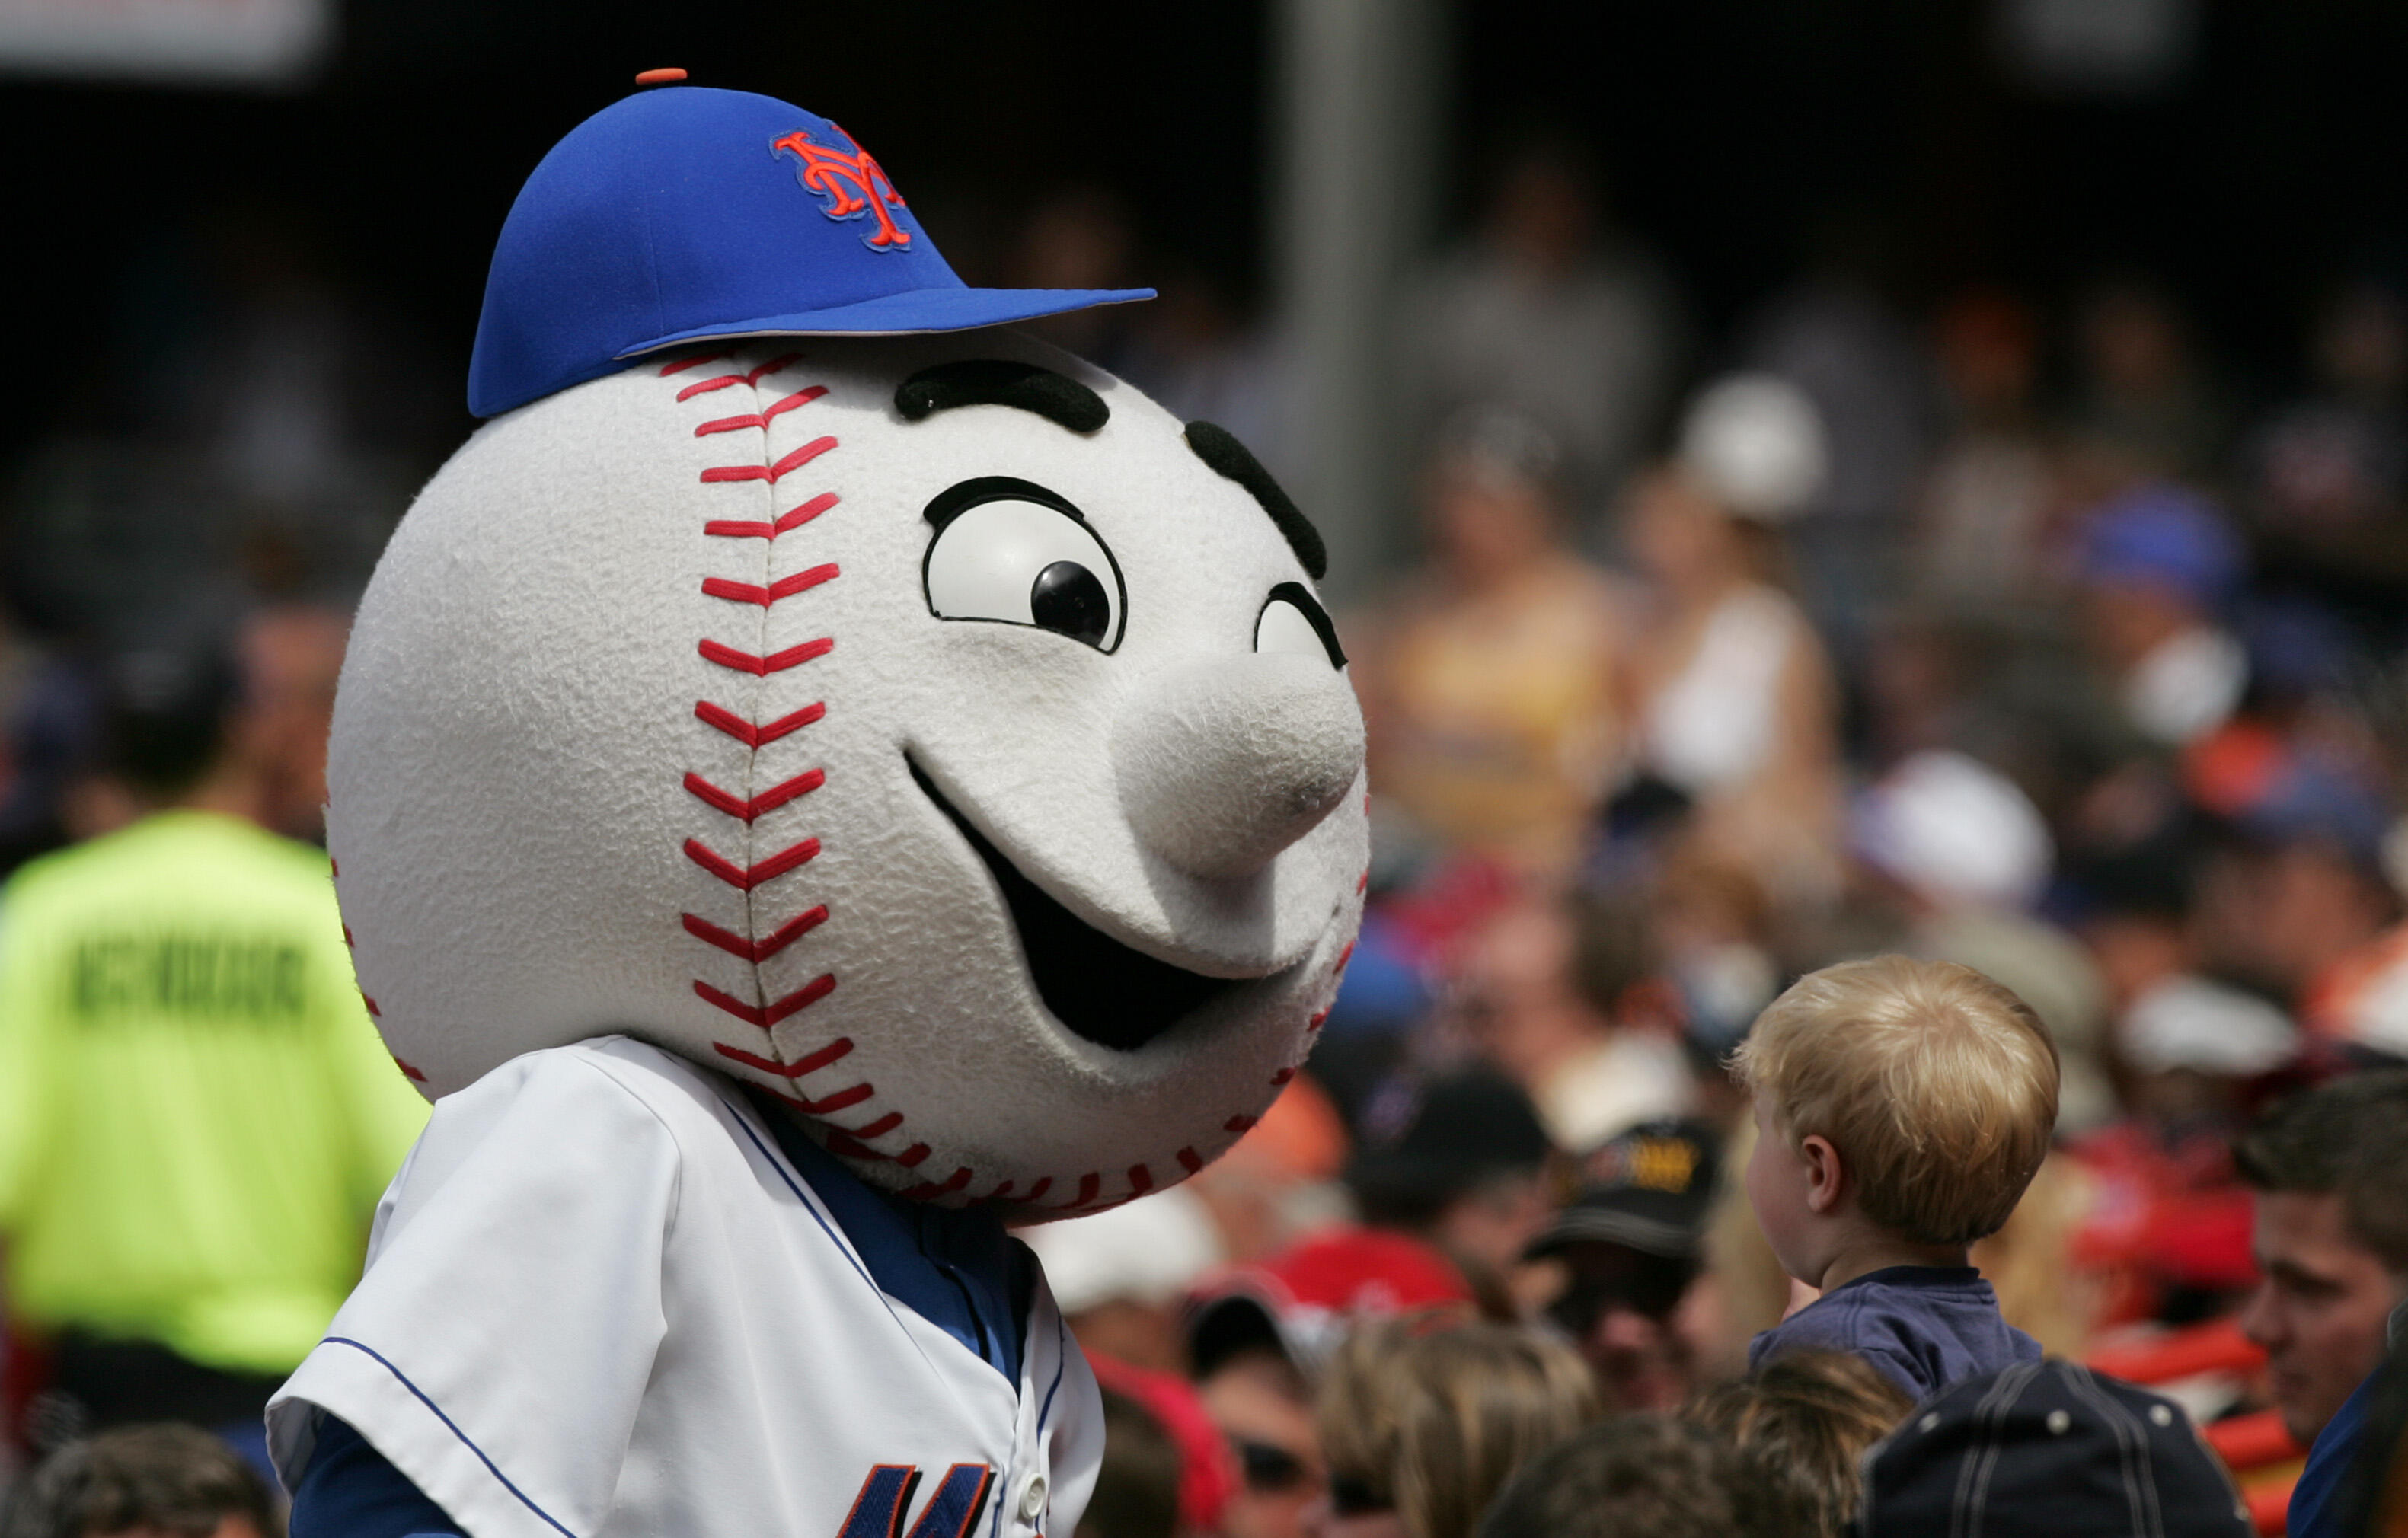 FLUSHING, NY - MAY 20: Mr. Met, the mascot of the New York Mets, during the game against the St. Louis Cardinals on May 20, 2004 at Shea Stadium in Flushing, New York.  The Cardinals won 11-4.  (Photo by Ezra Shaw/Getty Images)